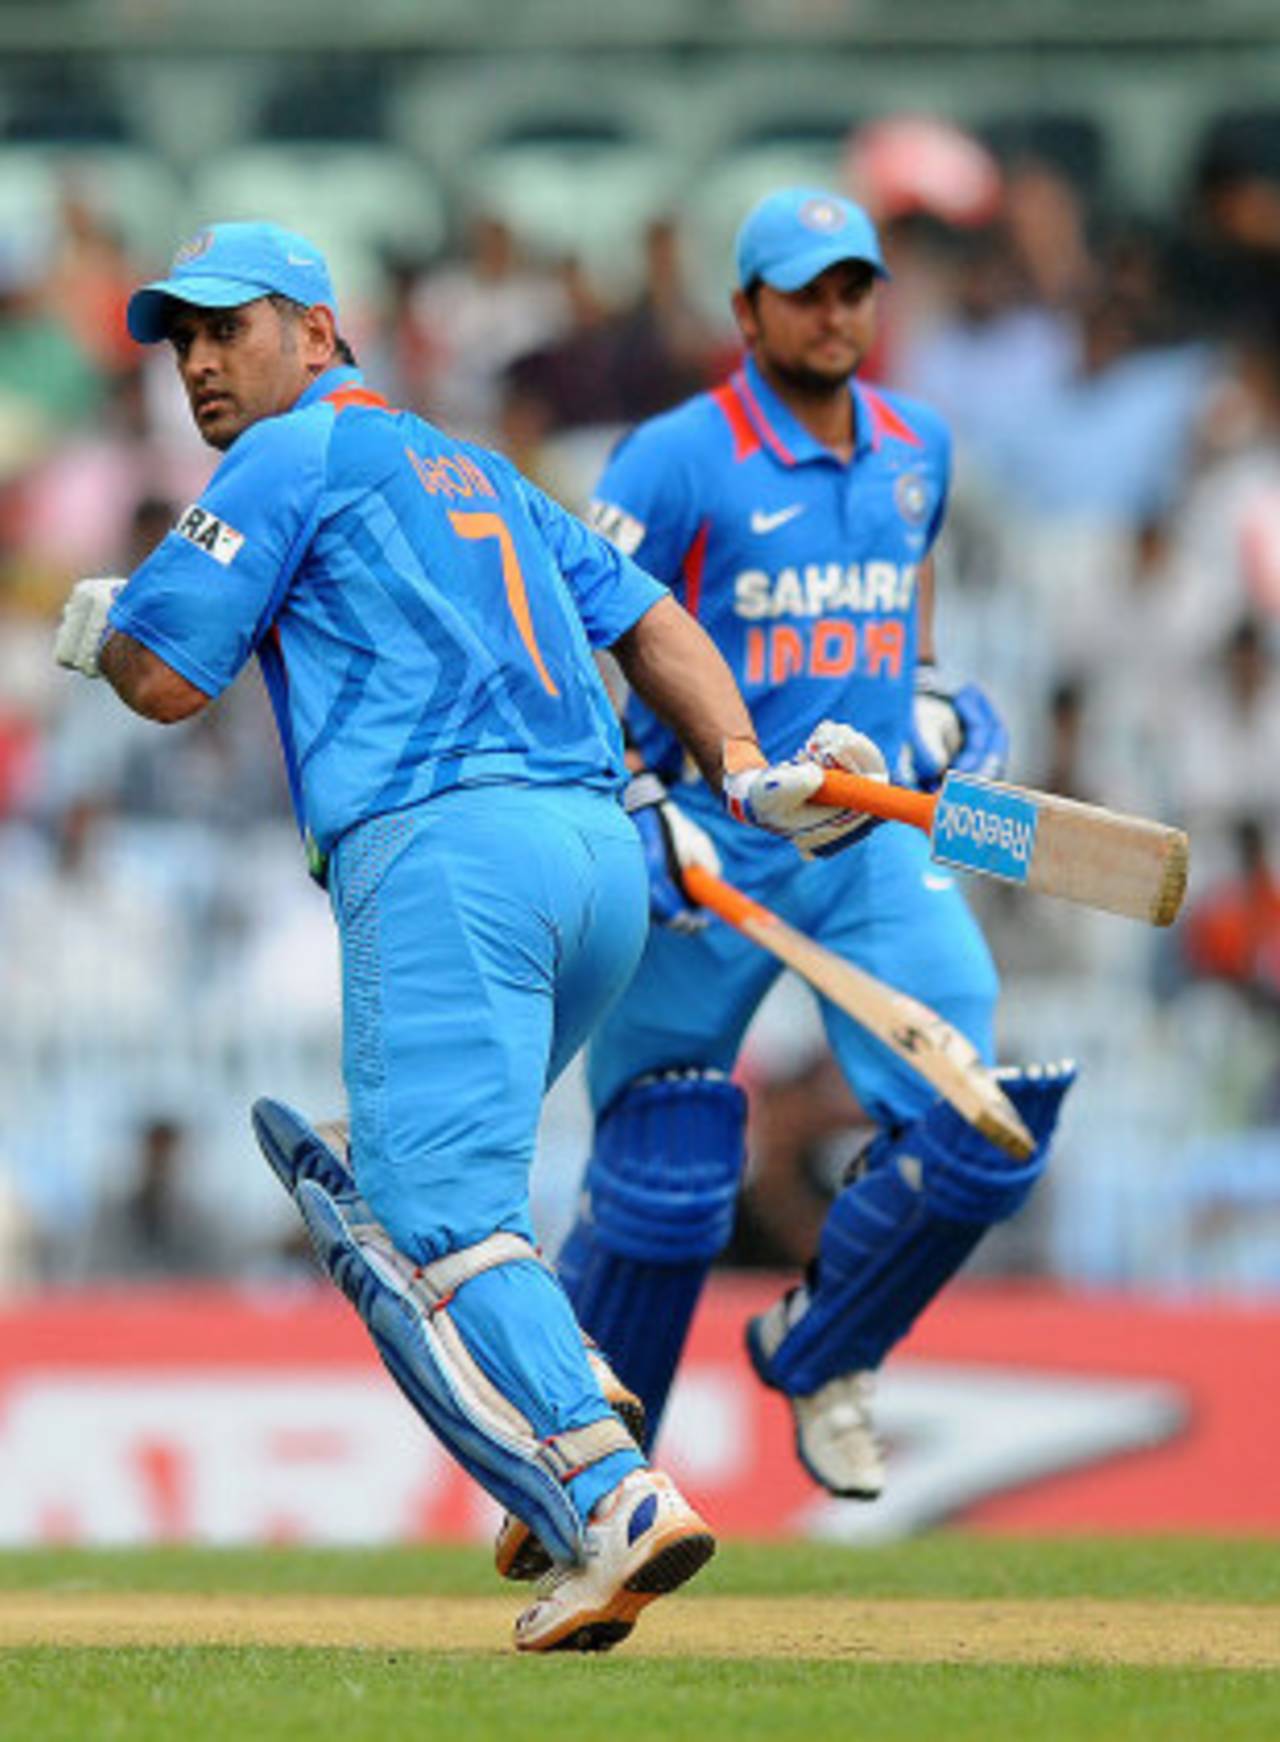 MS Dhoni and Suresh Raina added 73 for the sixth wicket, India v Pakistan, 1st ODI, Chennai, December 30, 2012